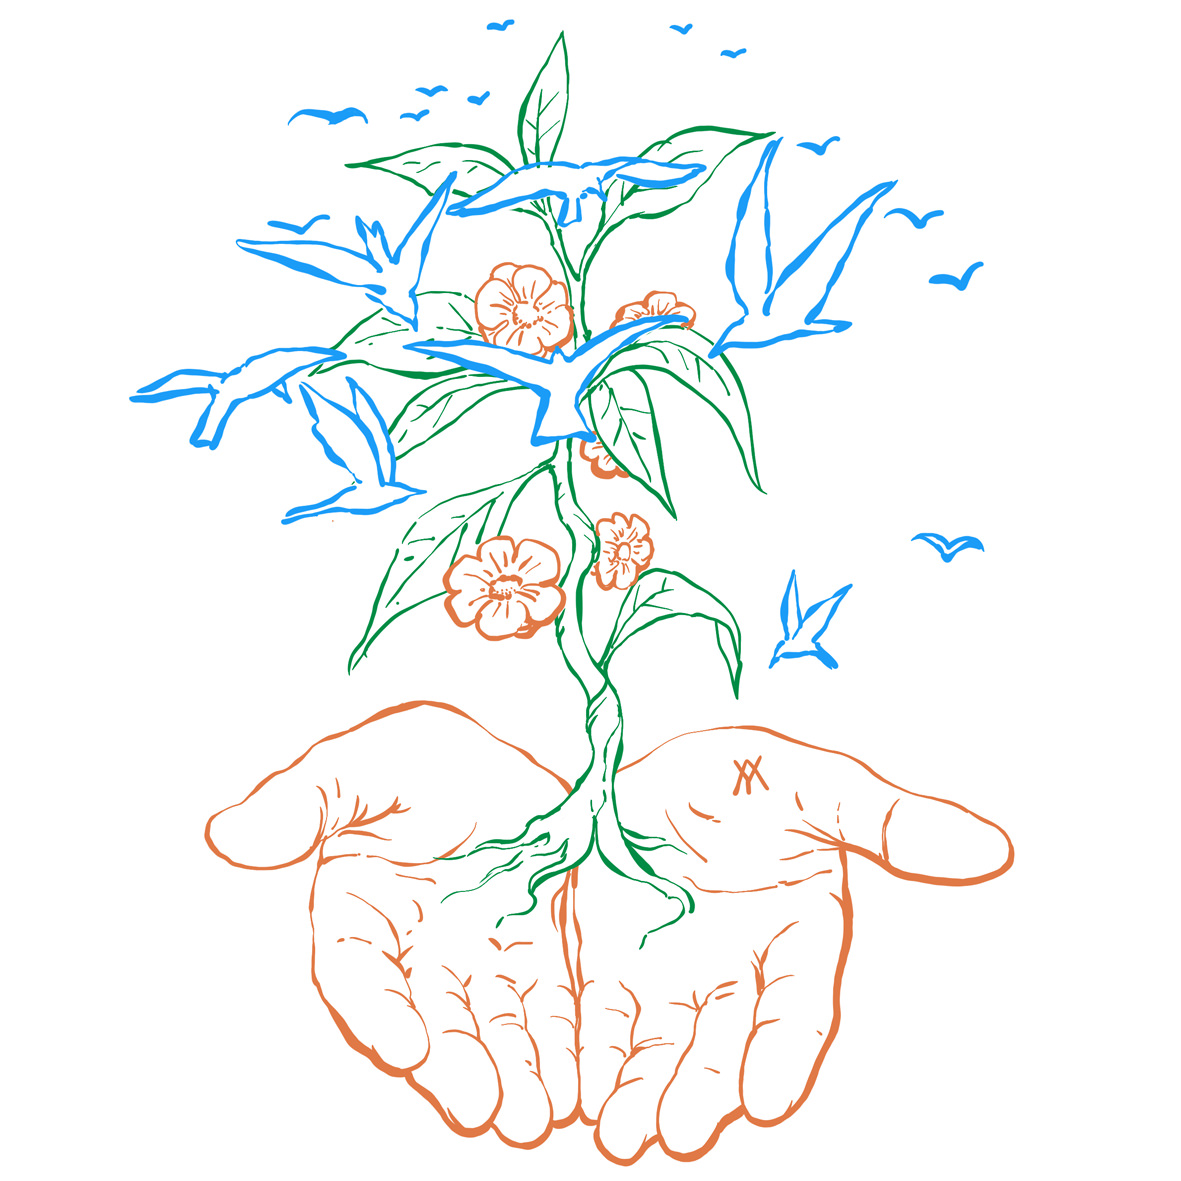 Sow, learn and growth, illustration